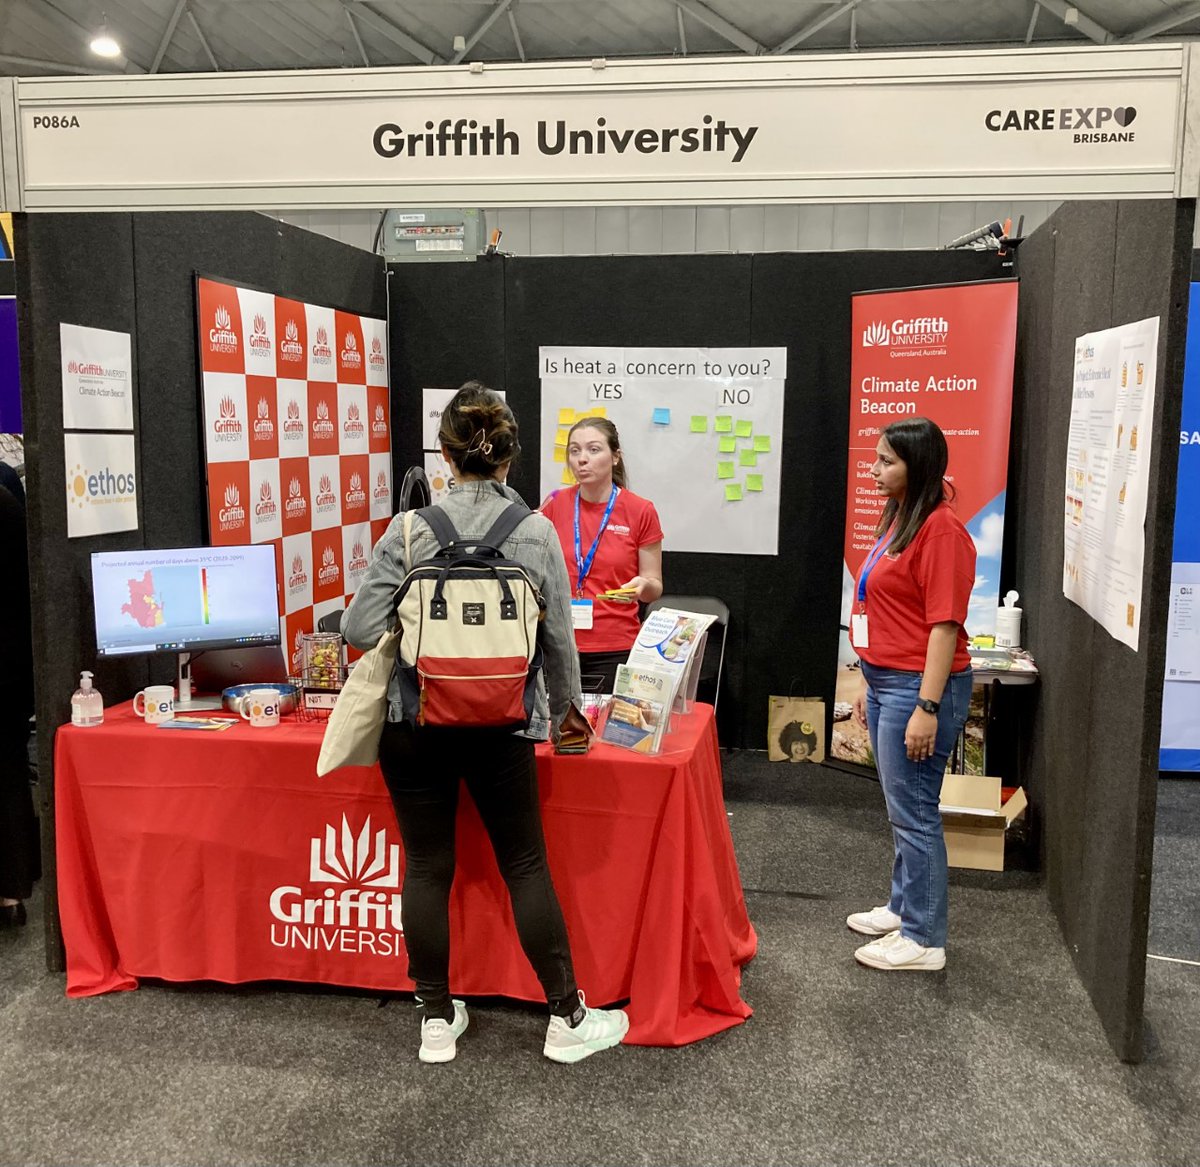 Our researchers are at the Brisbane Care Expo today promoting their exciting project, Ethos, focused on extreme heat and older persons. Want to know more about heat health risks and how can we adapt using digital technology? Come and chat to us! #ClimateActionBeacon